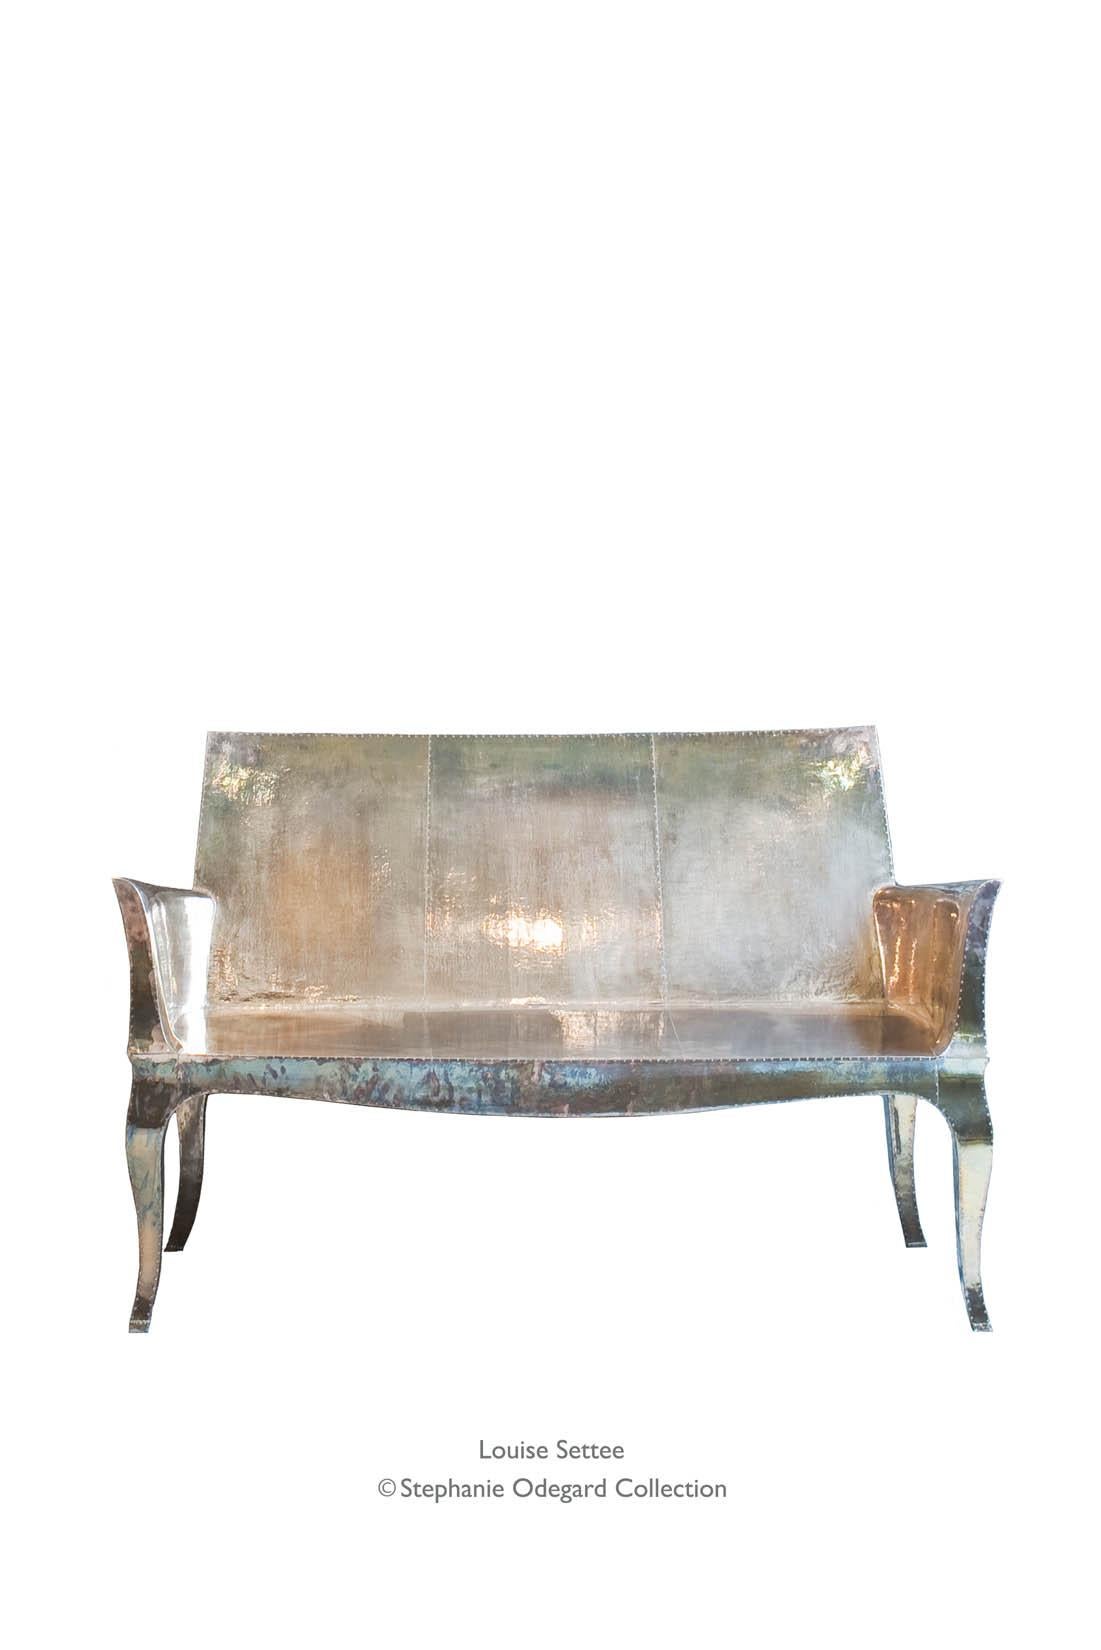 Louise Settee Art Deco Living Room Sets in Mid. Hammered Copper by Paul Mathieu For Sale 6